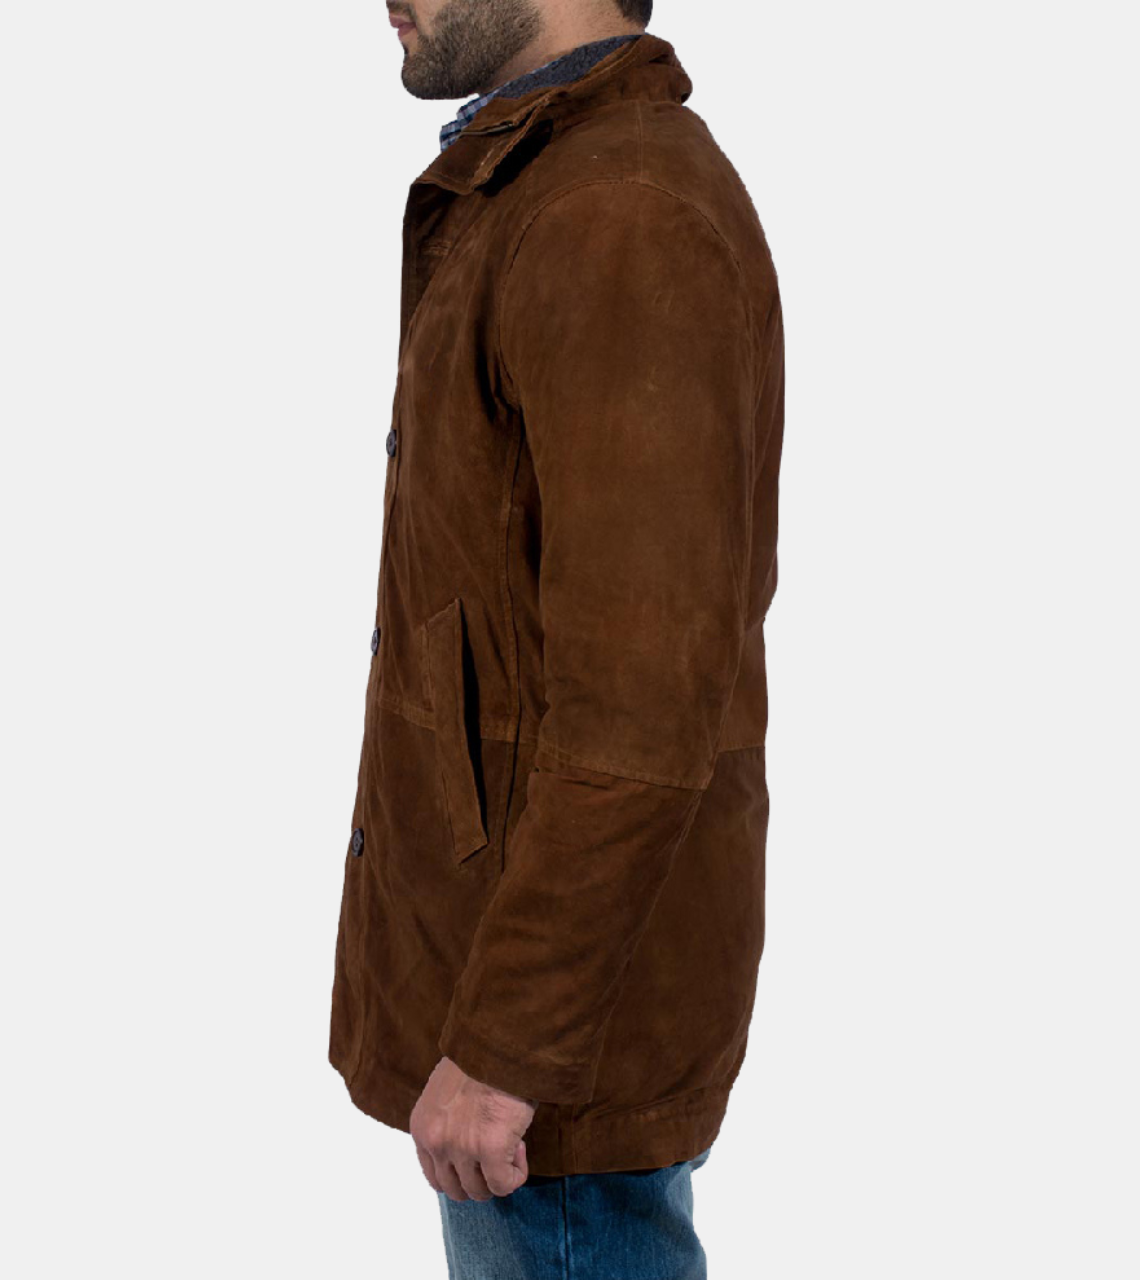  Tanned Suede Leather Jacket 